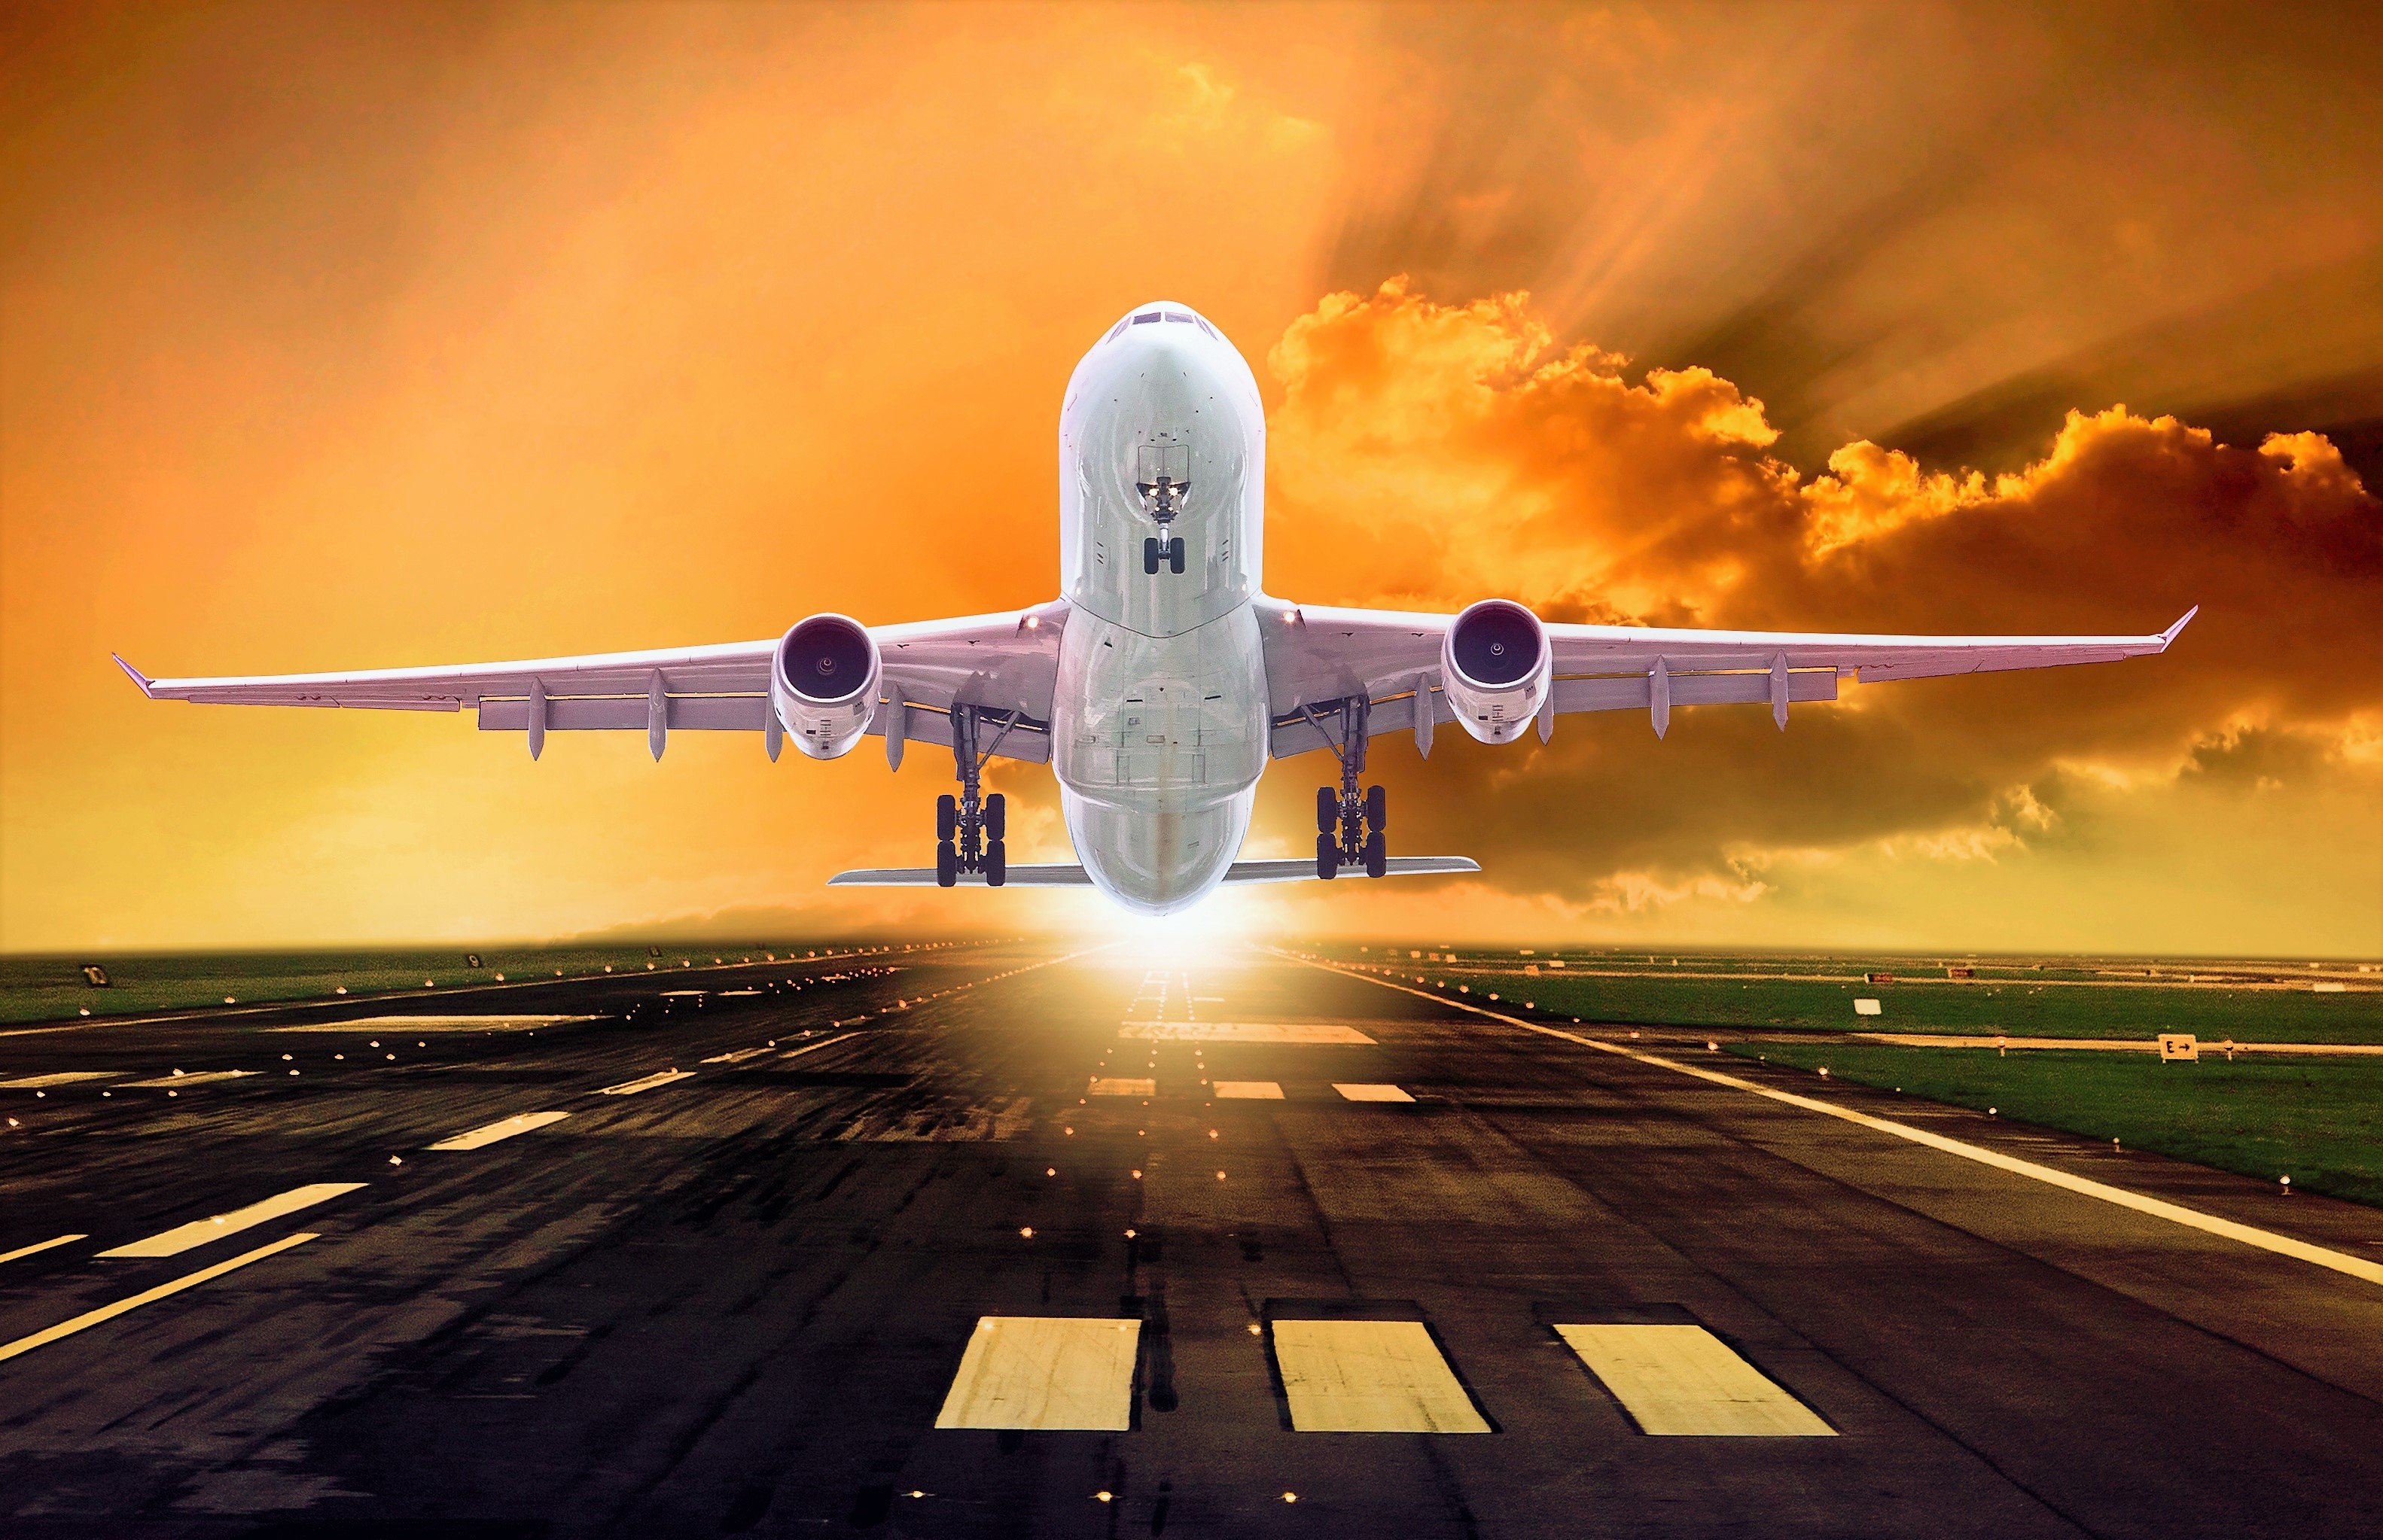 Plane Taking Off at Sunset HD Wallpaper. Background Image